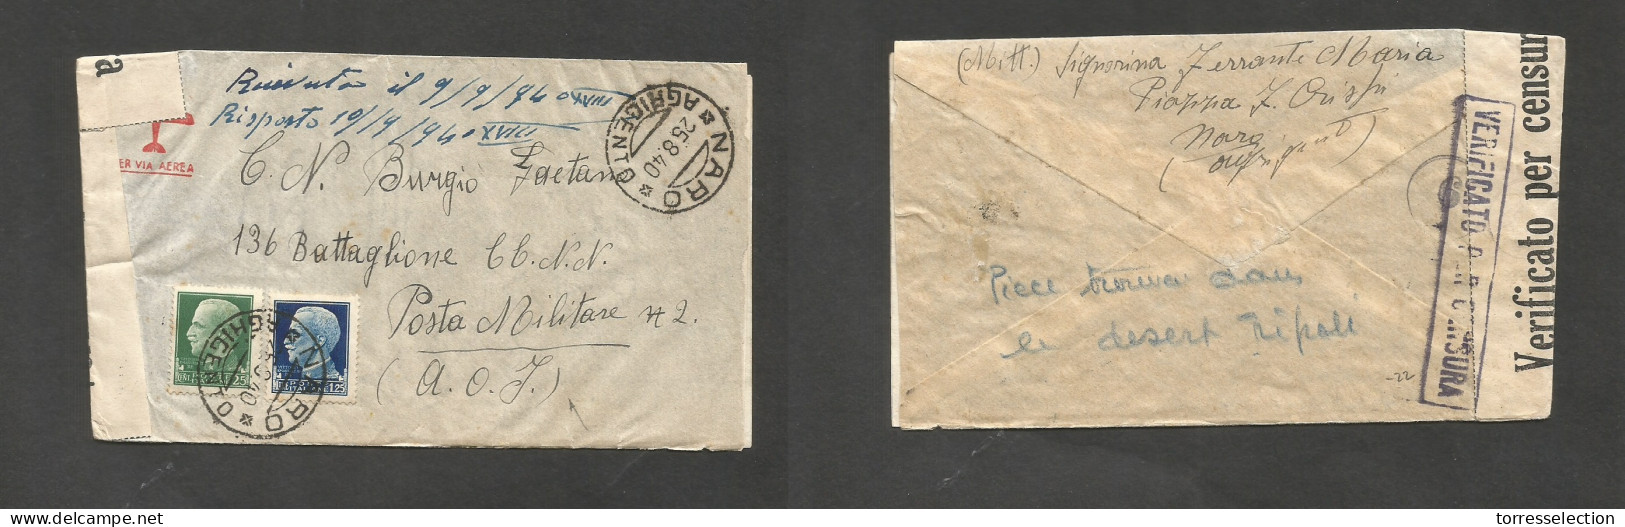 Italy - XX. 1940 (25 Aug) Naro - Africa Oriental Italiana. Air Multifkd Censored Envelope, Censored With Contains. SALE. - Sin Clasificación